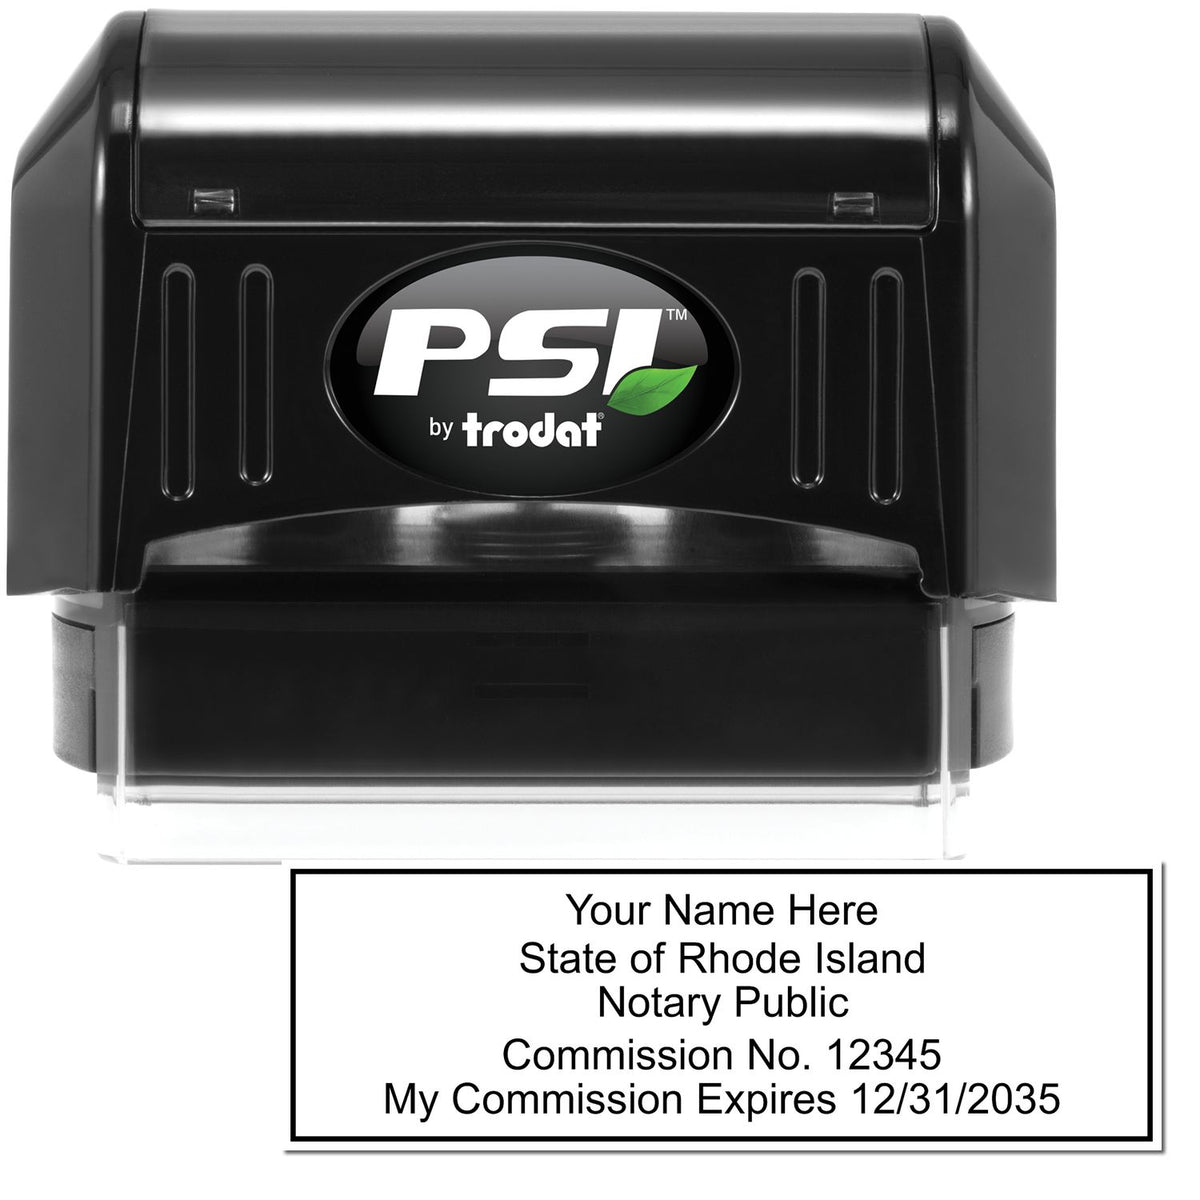 The main image for the PSI Rhode Island Notary Stamp depicting a sample of the imprint and electronic files